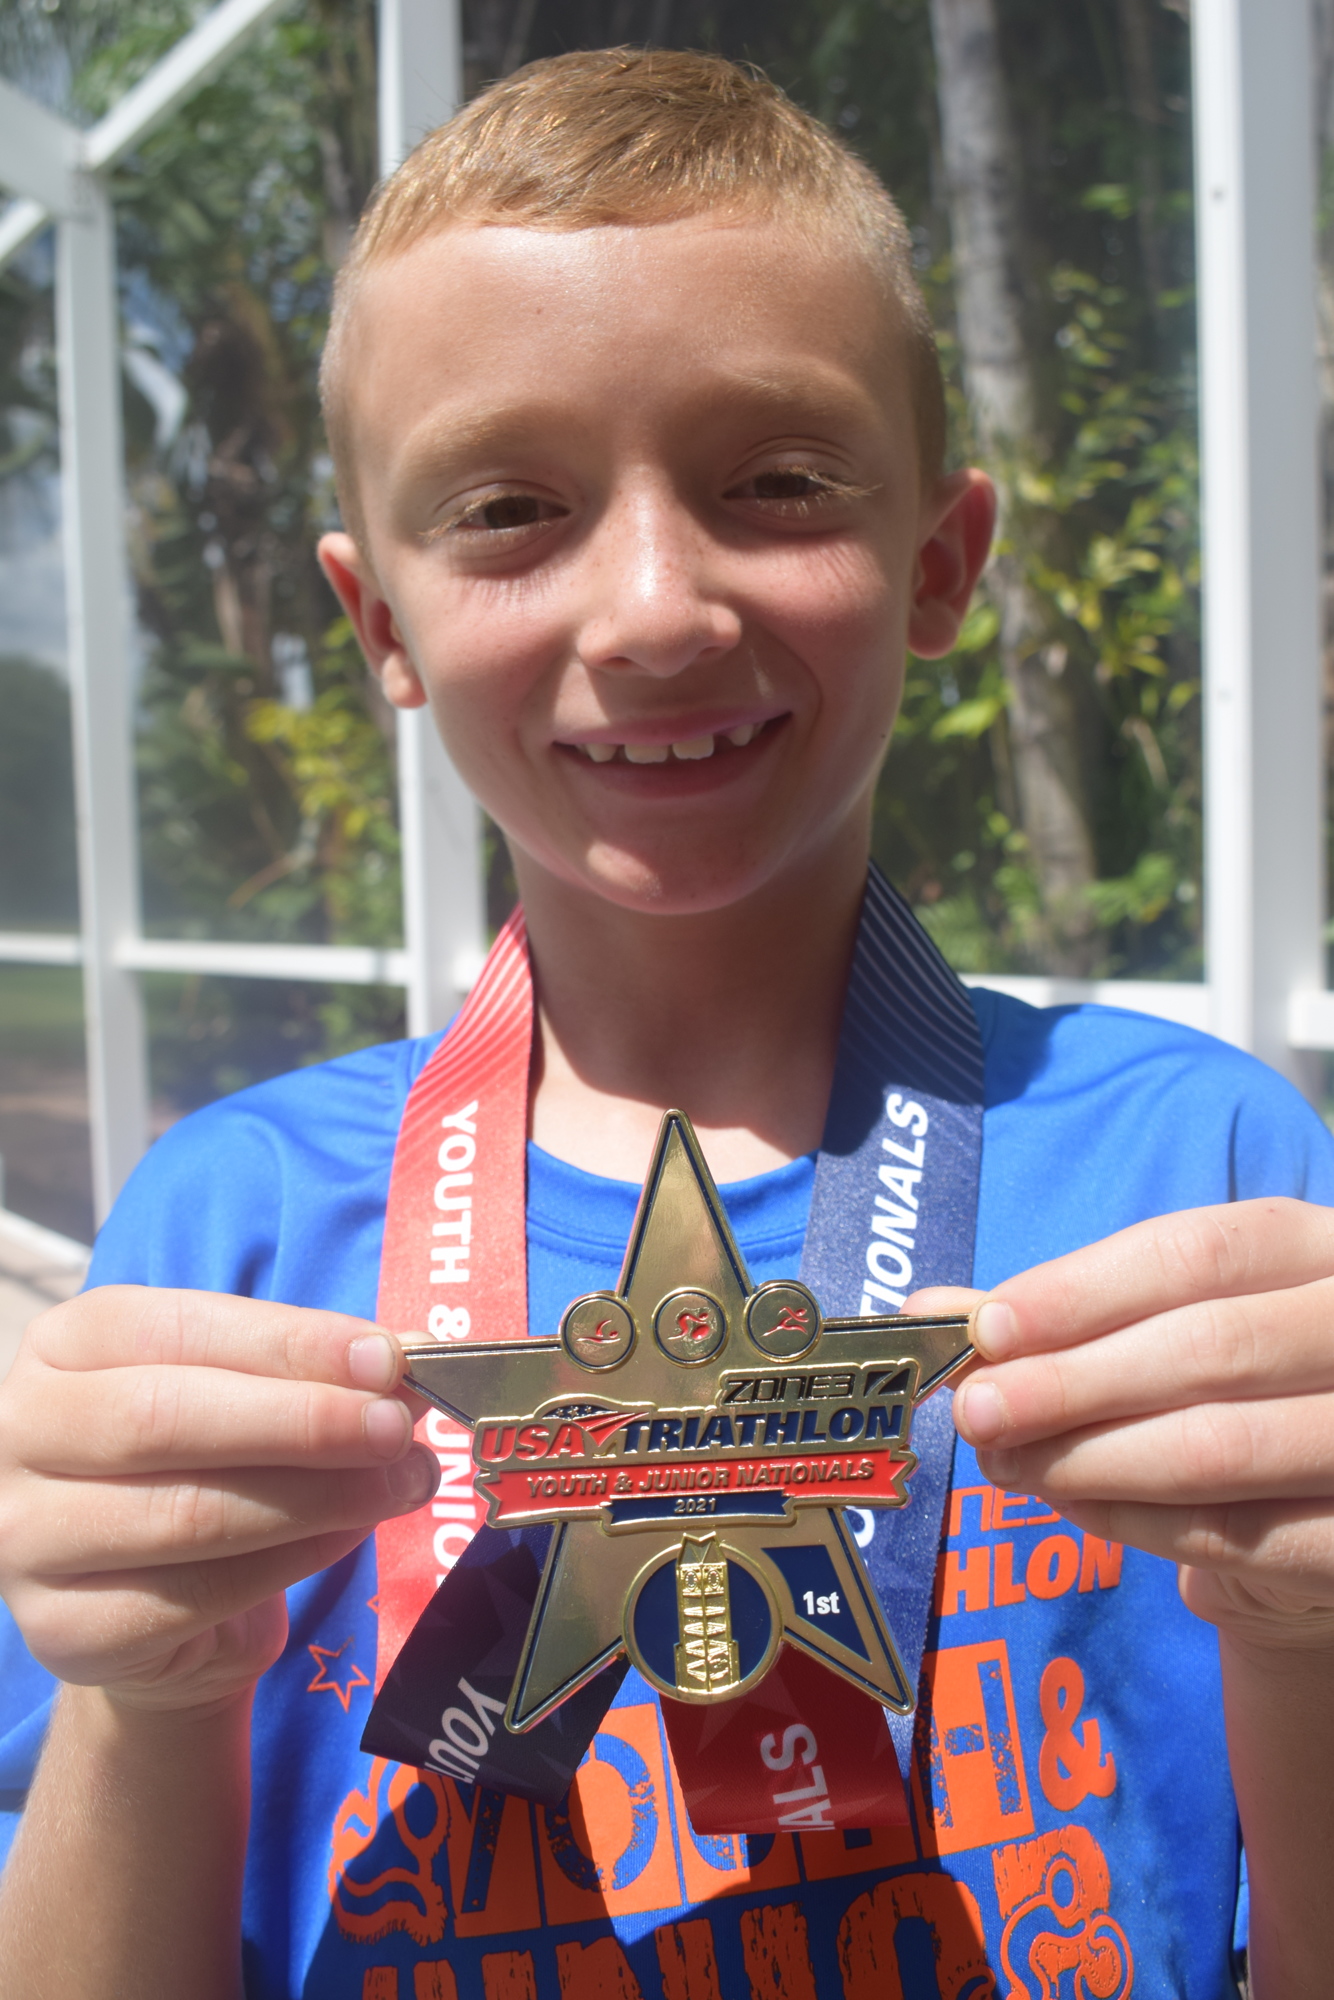 Aaron Westrip shows off the triathlon national championship gold medal he won. Photo by Jay Heater